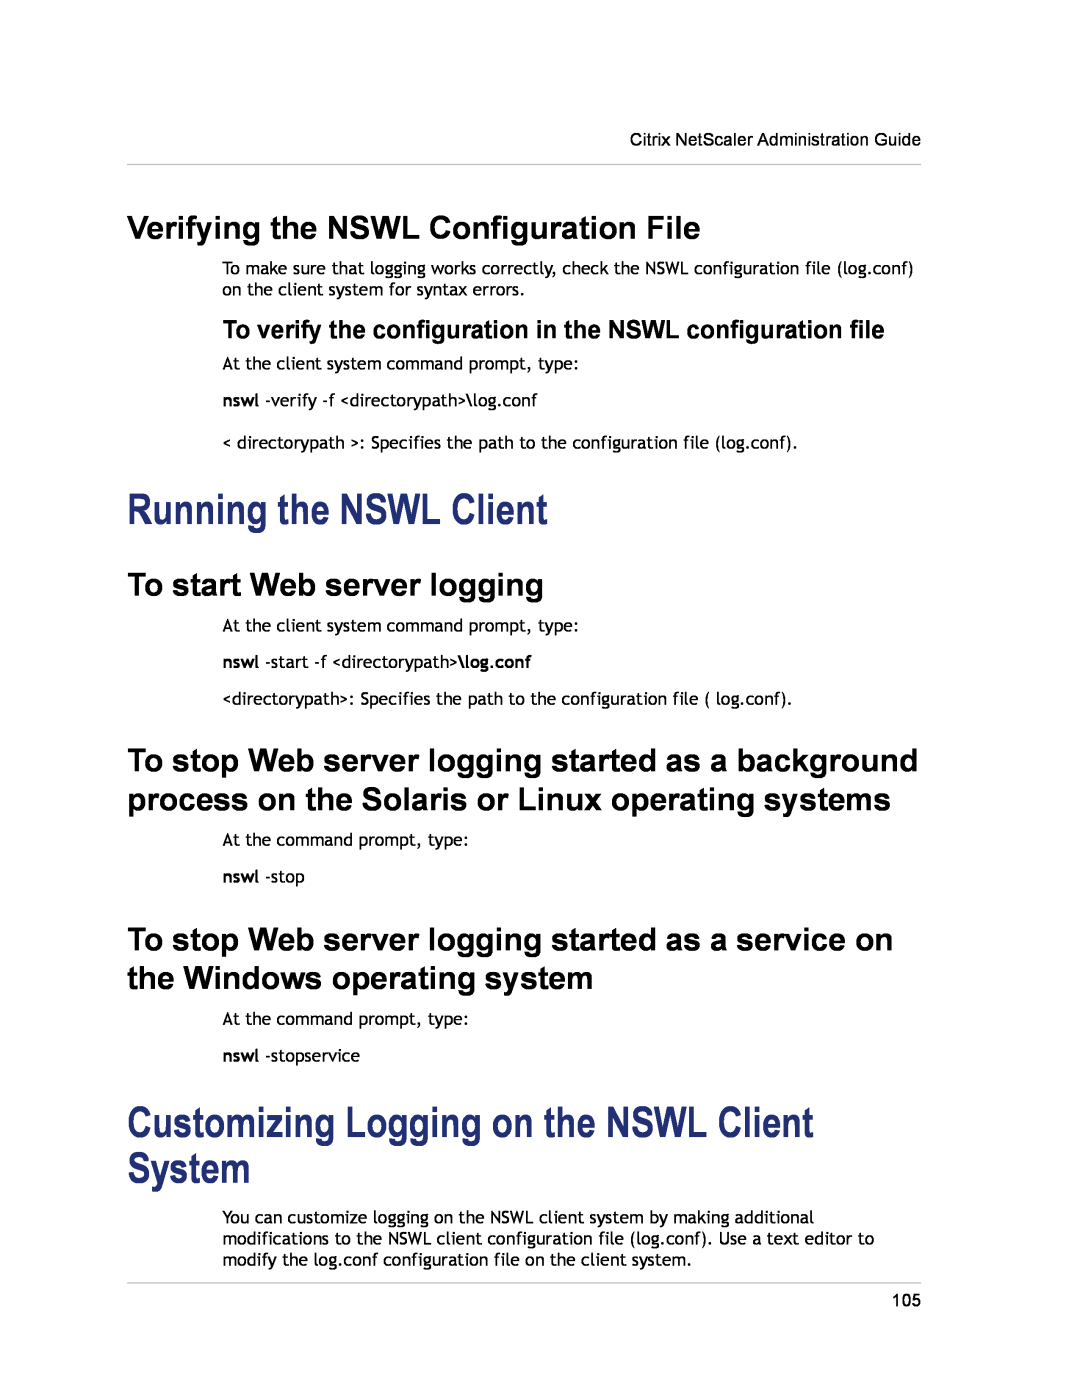 Citrix Systems CITRIX NETSCALER 9.3 Running the NSWL Client, Customizing Logging on the NSWL Client System, nswl -stop 